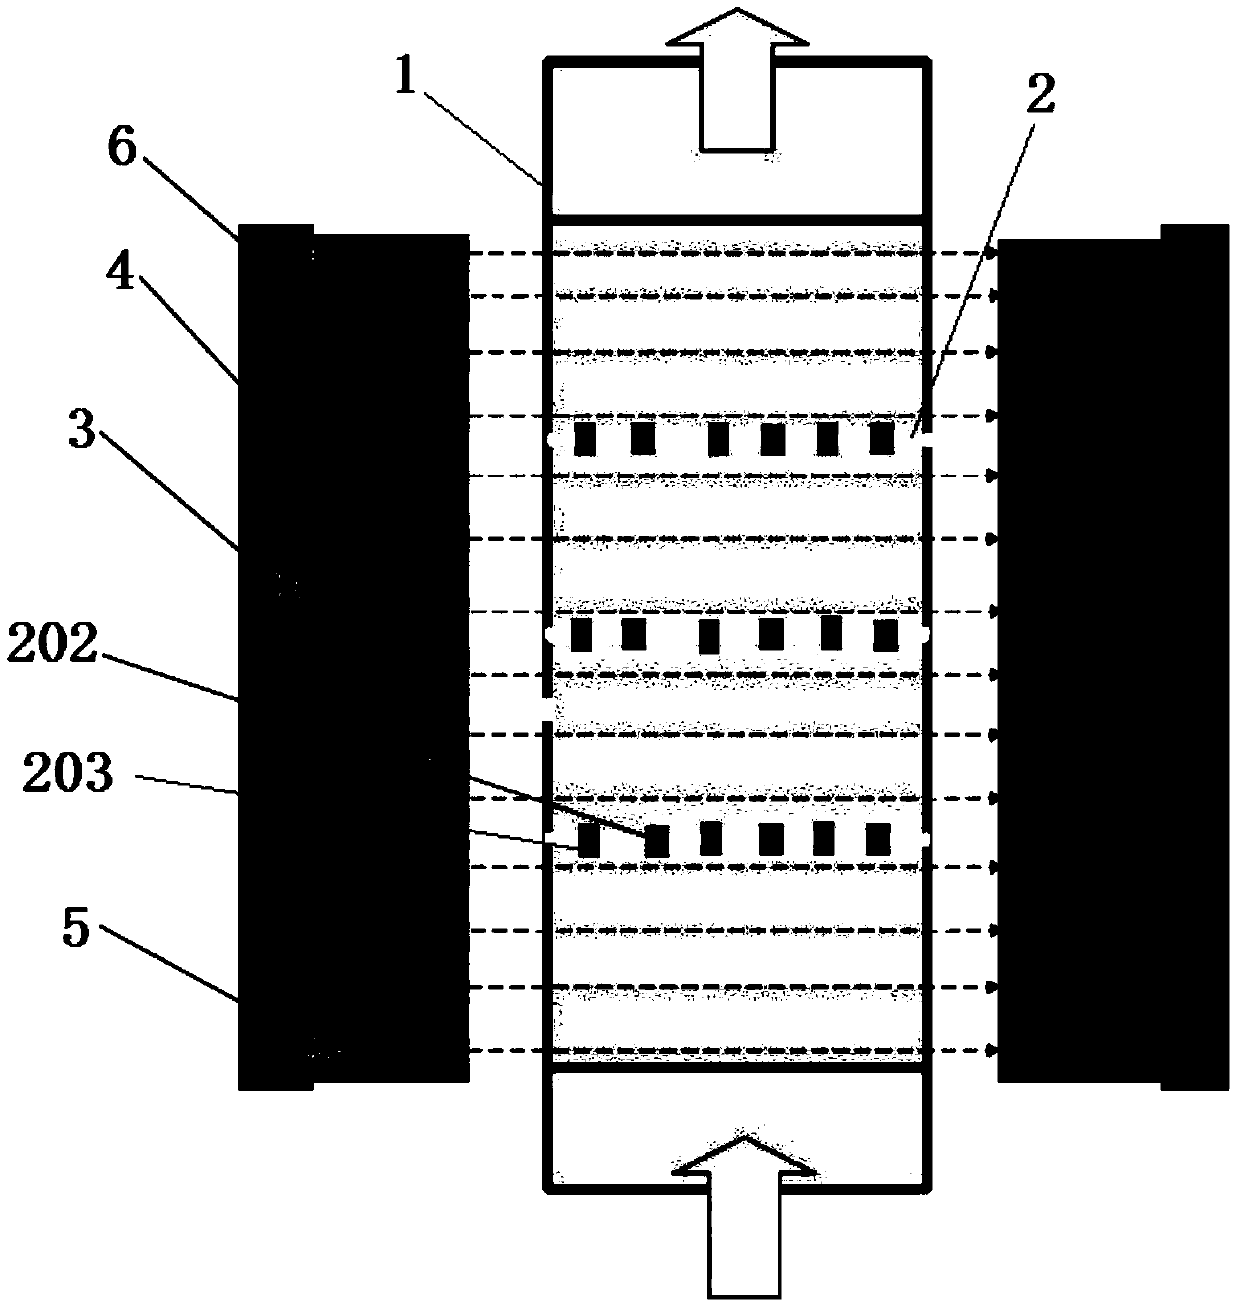 Superconducting magnetic fluid flowmeter internally provided with grilles